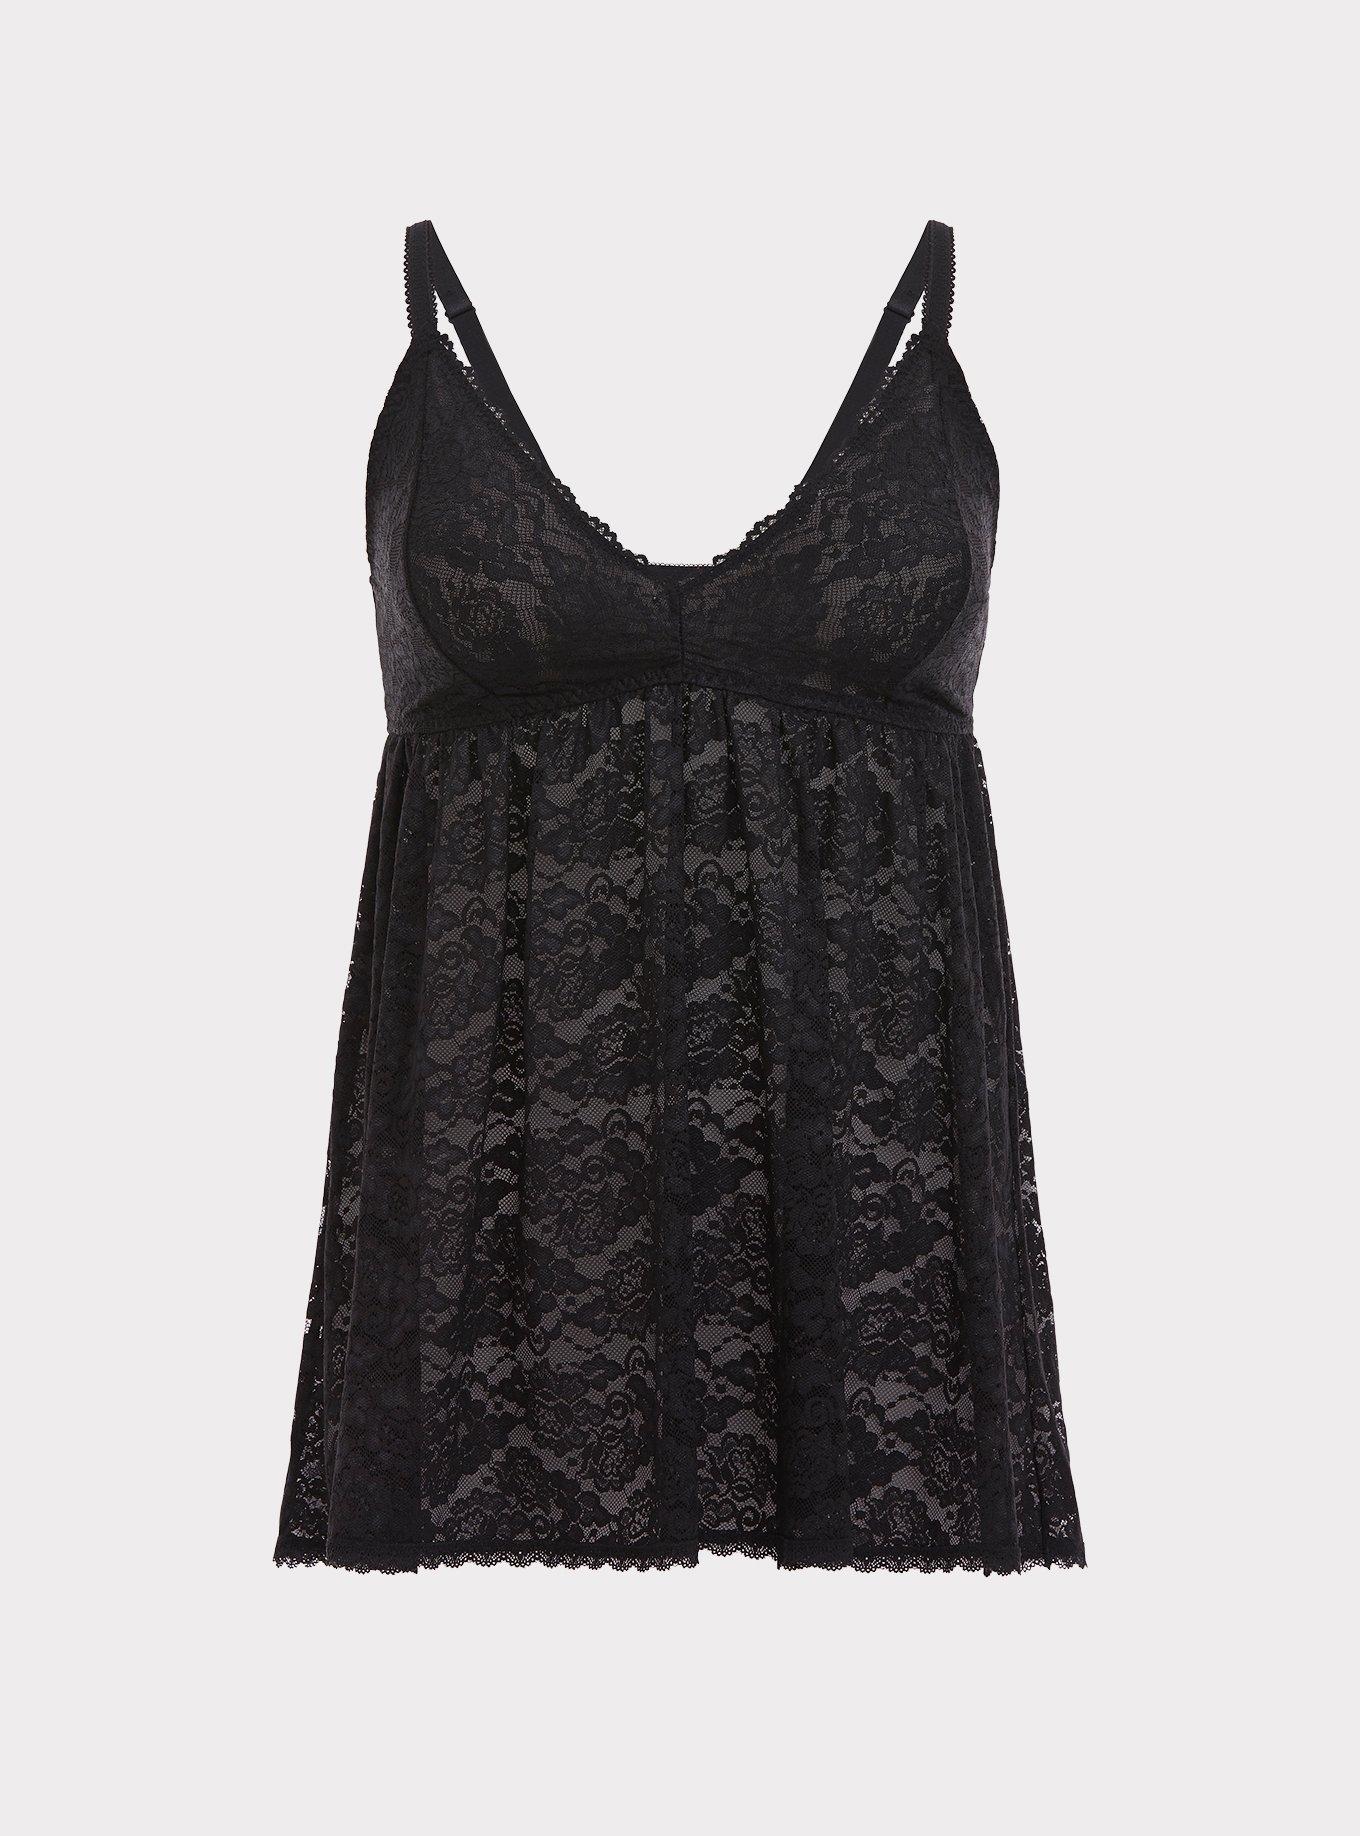 Plus Size - Simply Lace Babydoll - Torrid